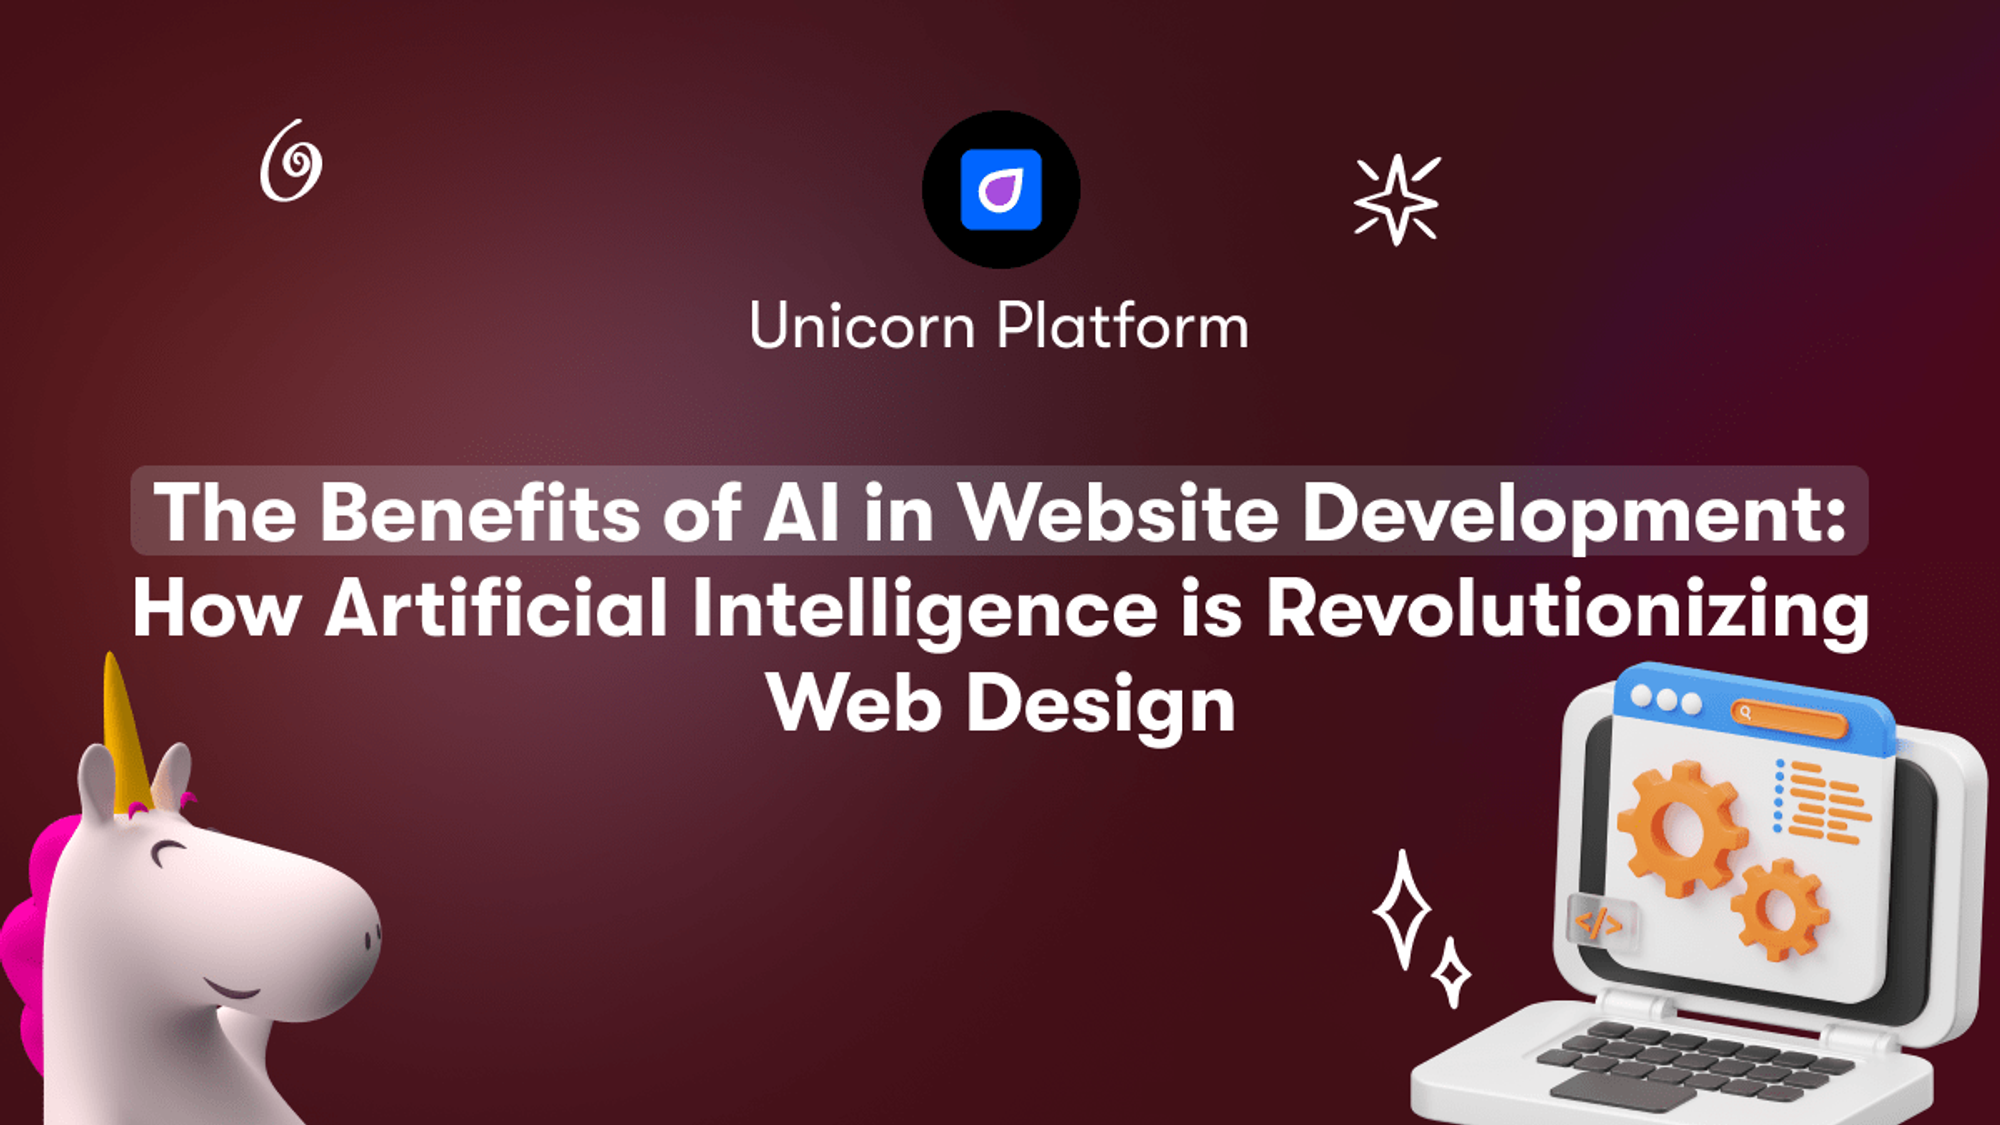 The Benefits of AI in Website Development: How Artificial Intelligence is Revolutionizing Web Design